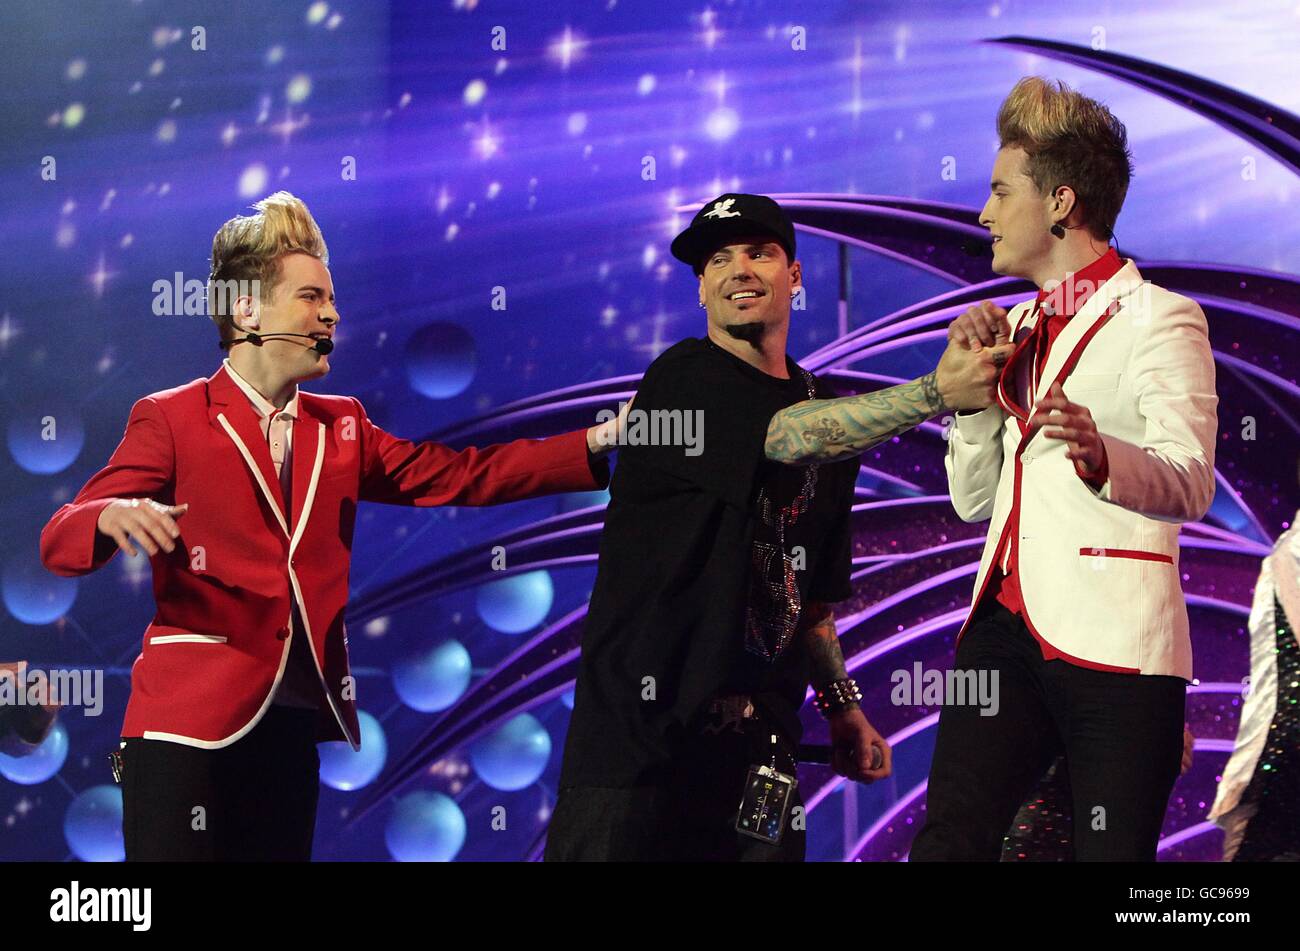 John and Edward Grimes (aka Jedward) performing with Vanilla Ice (centre) during the National Television Awards 2010, at the 02 Arena, London. Stock Photo